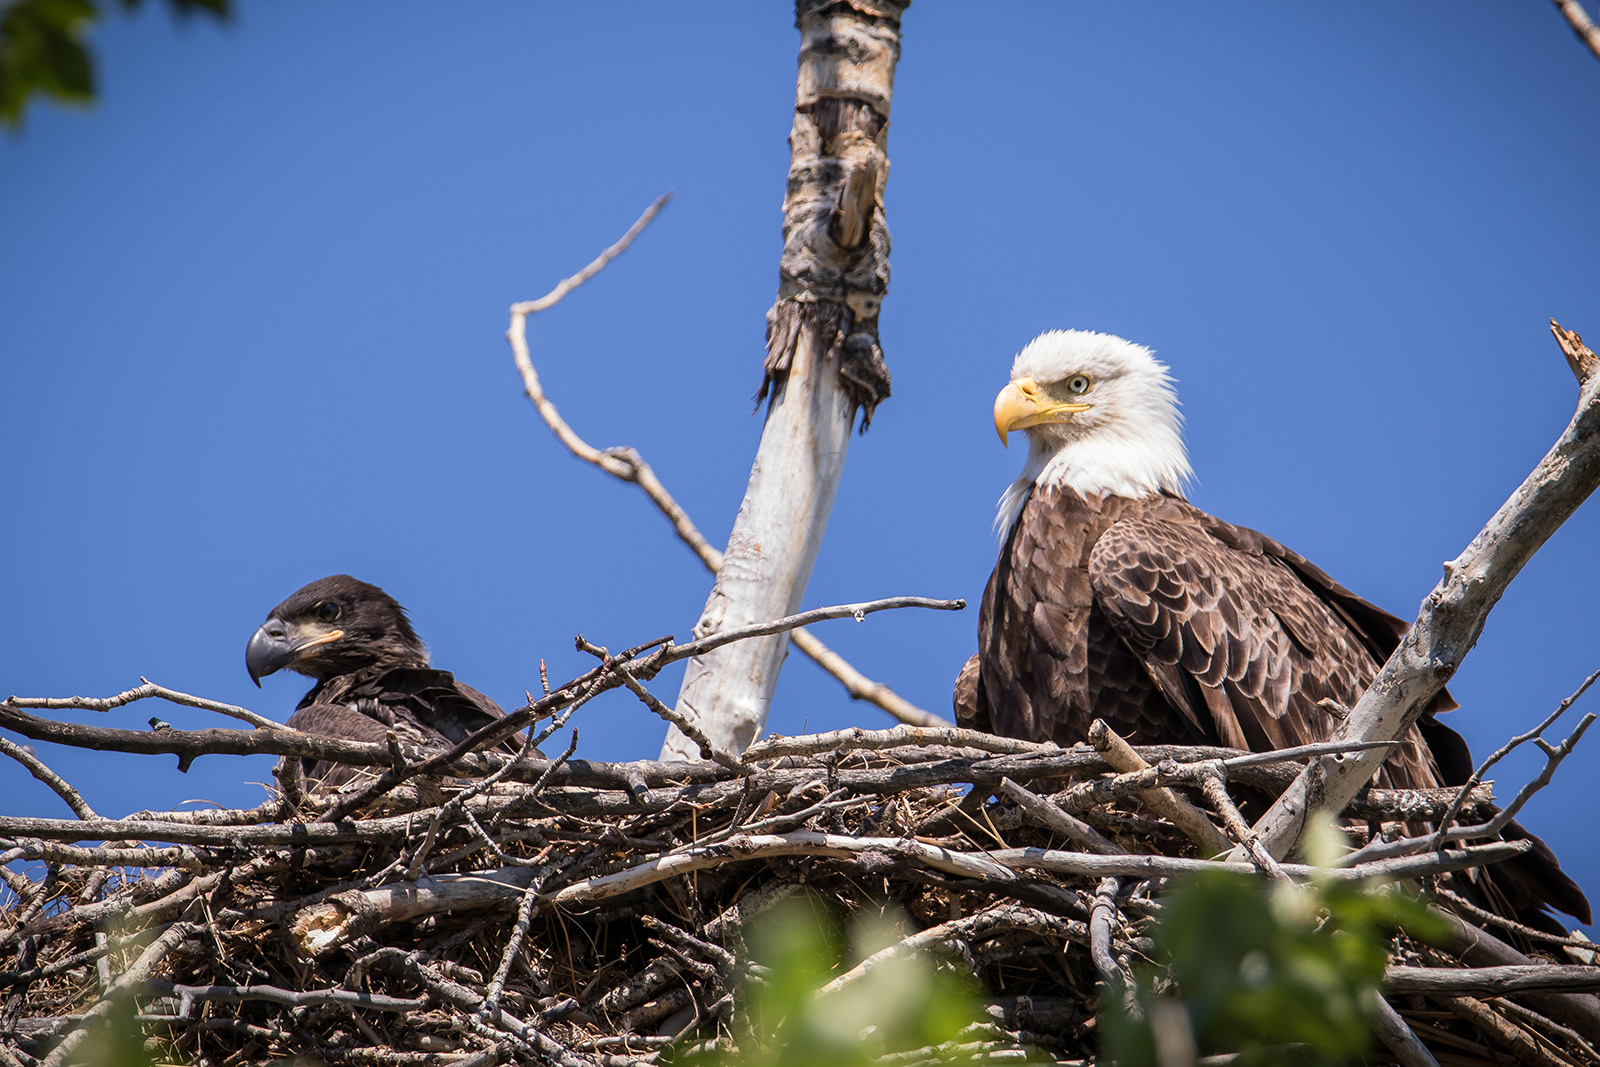 An image of two bald eagles, one young and one adult in a nest